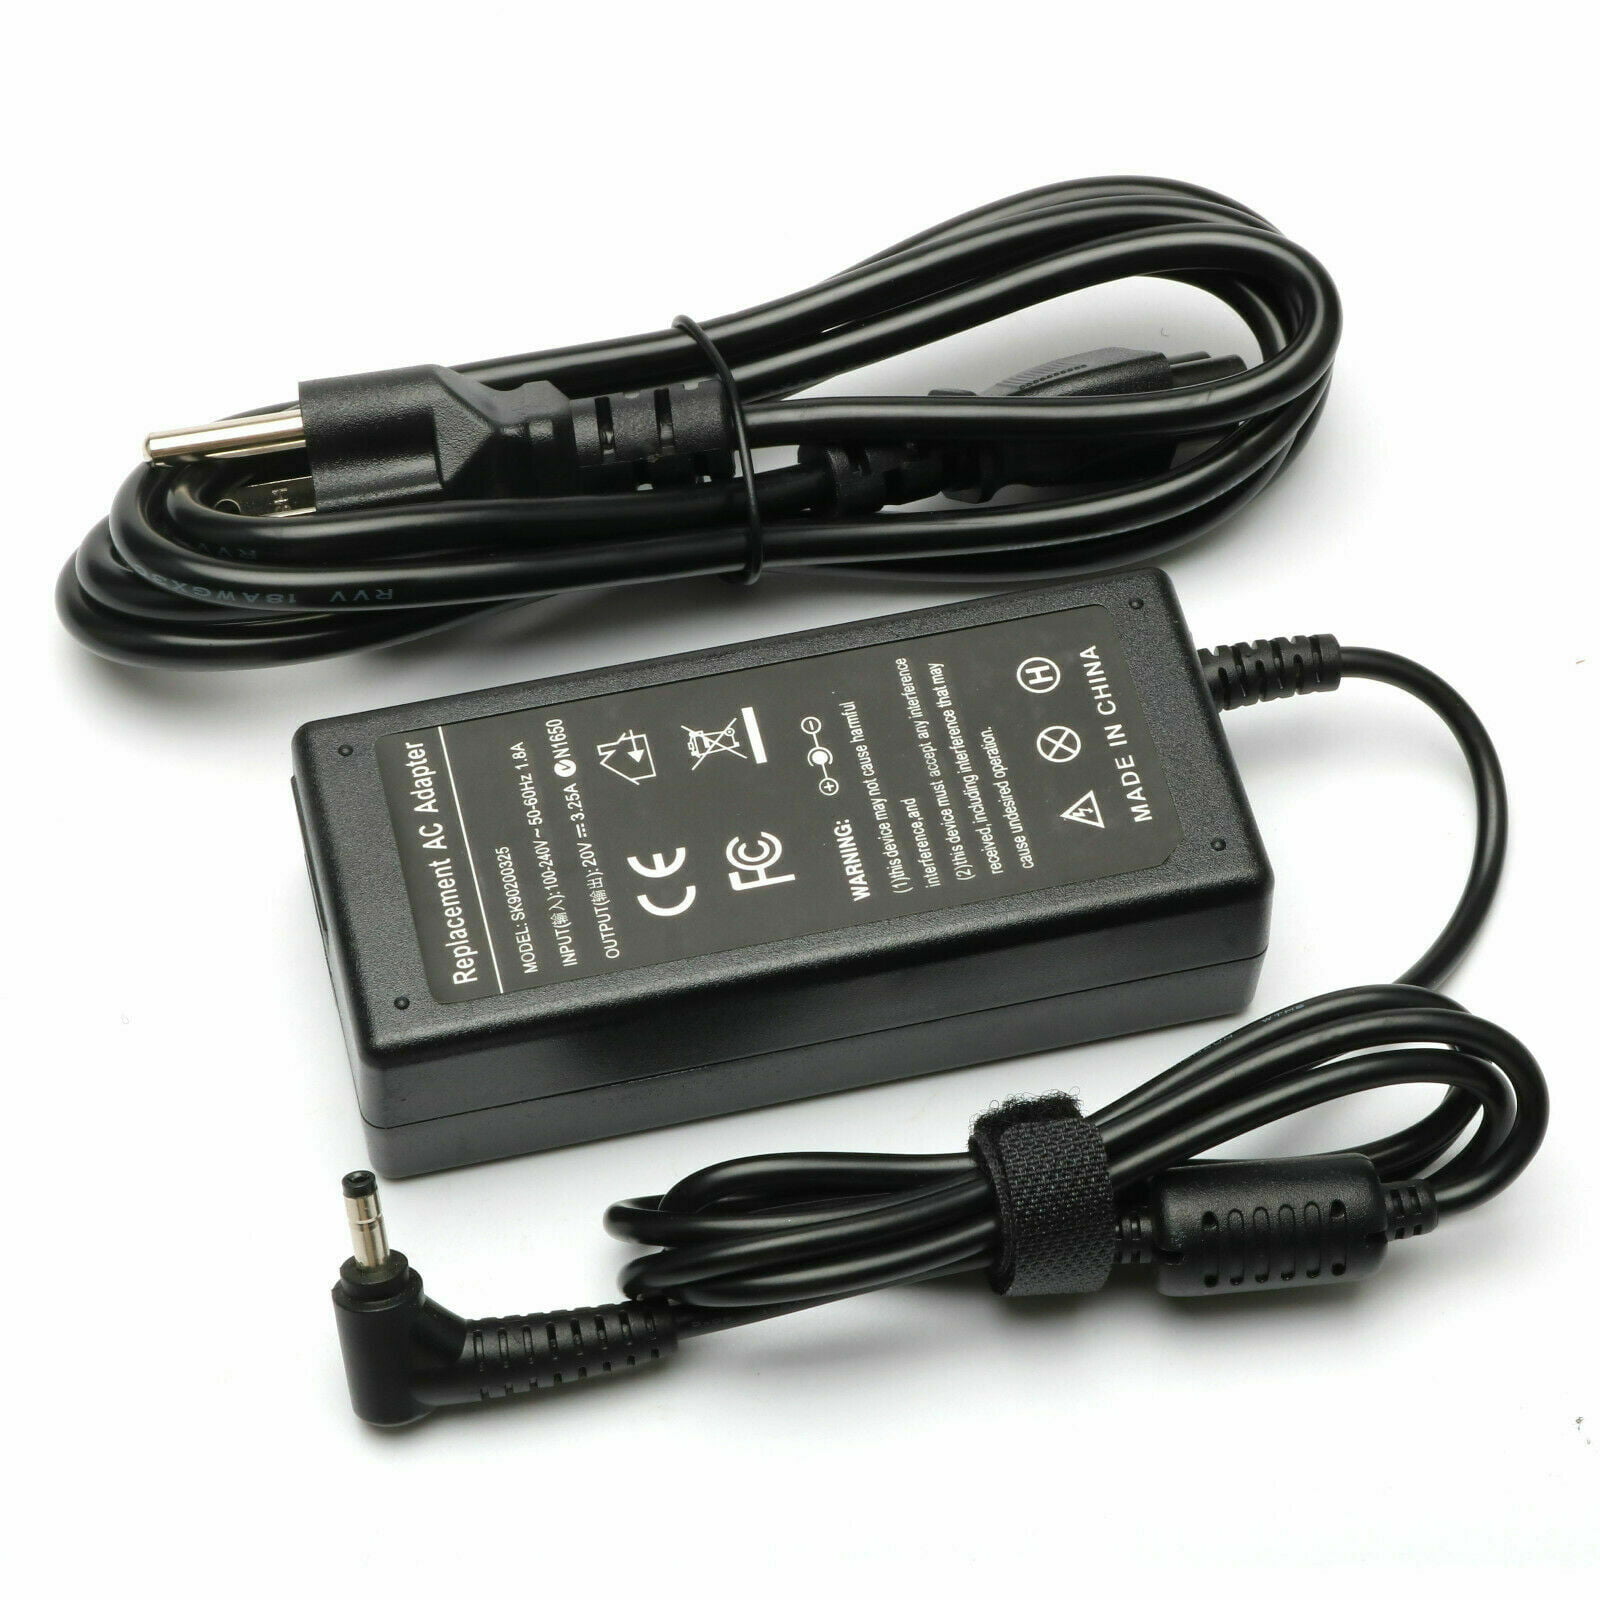 Power Adapter Charger For Lenovo Ideapad S145 15iwl 81mv0001us 156